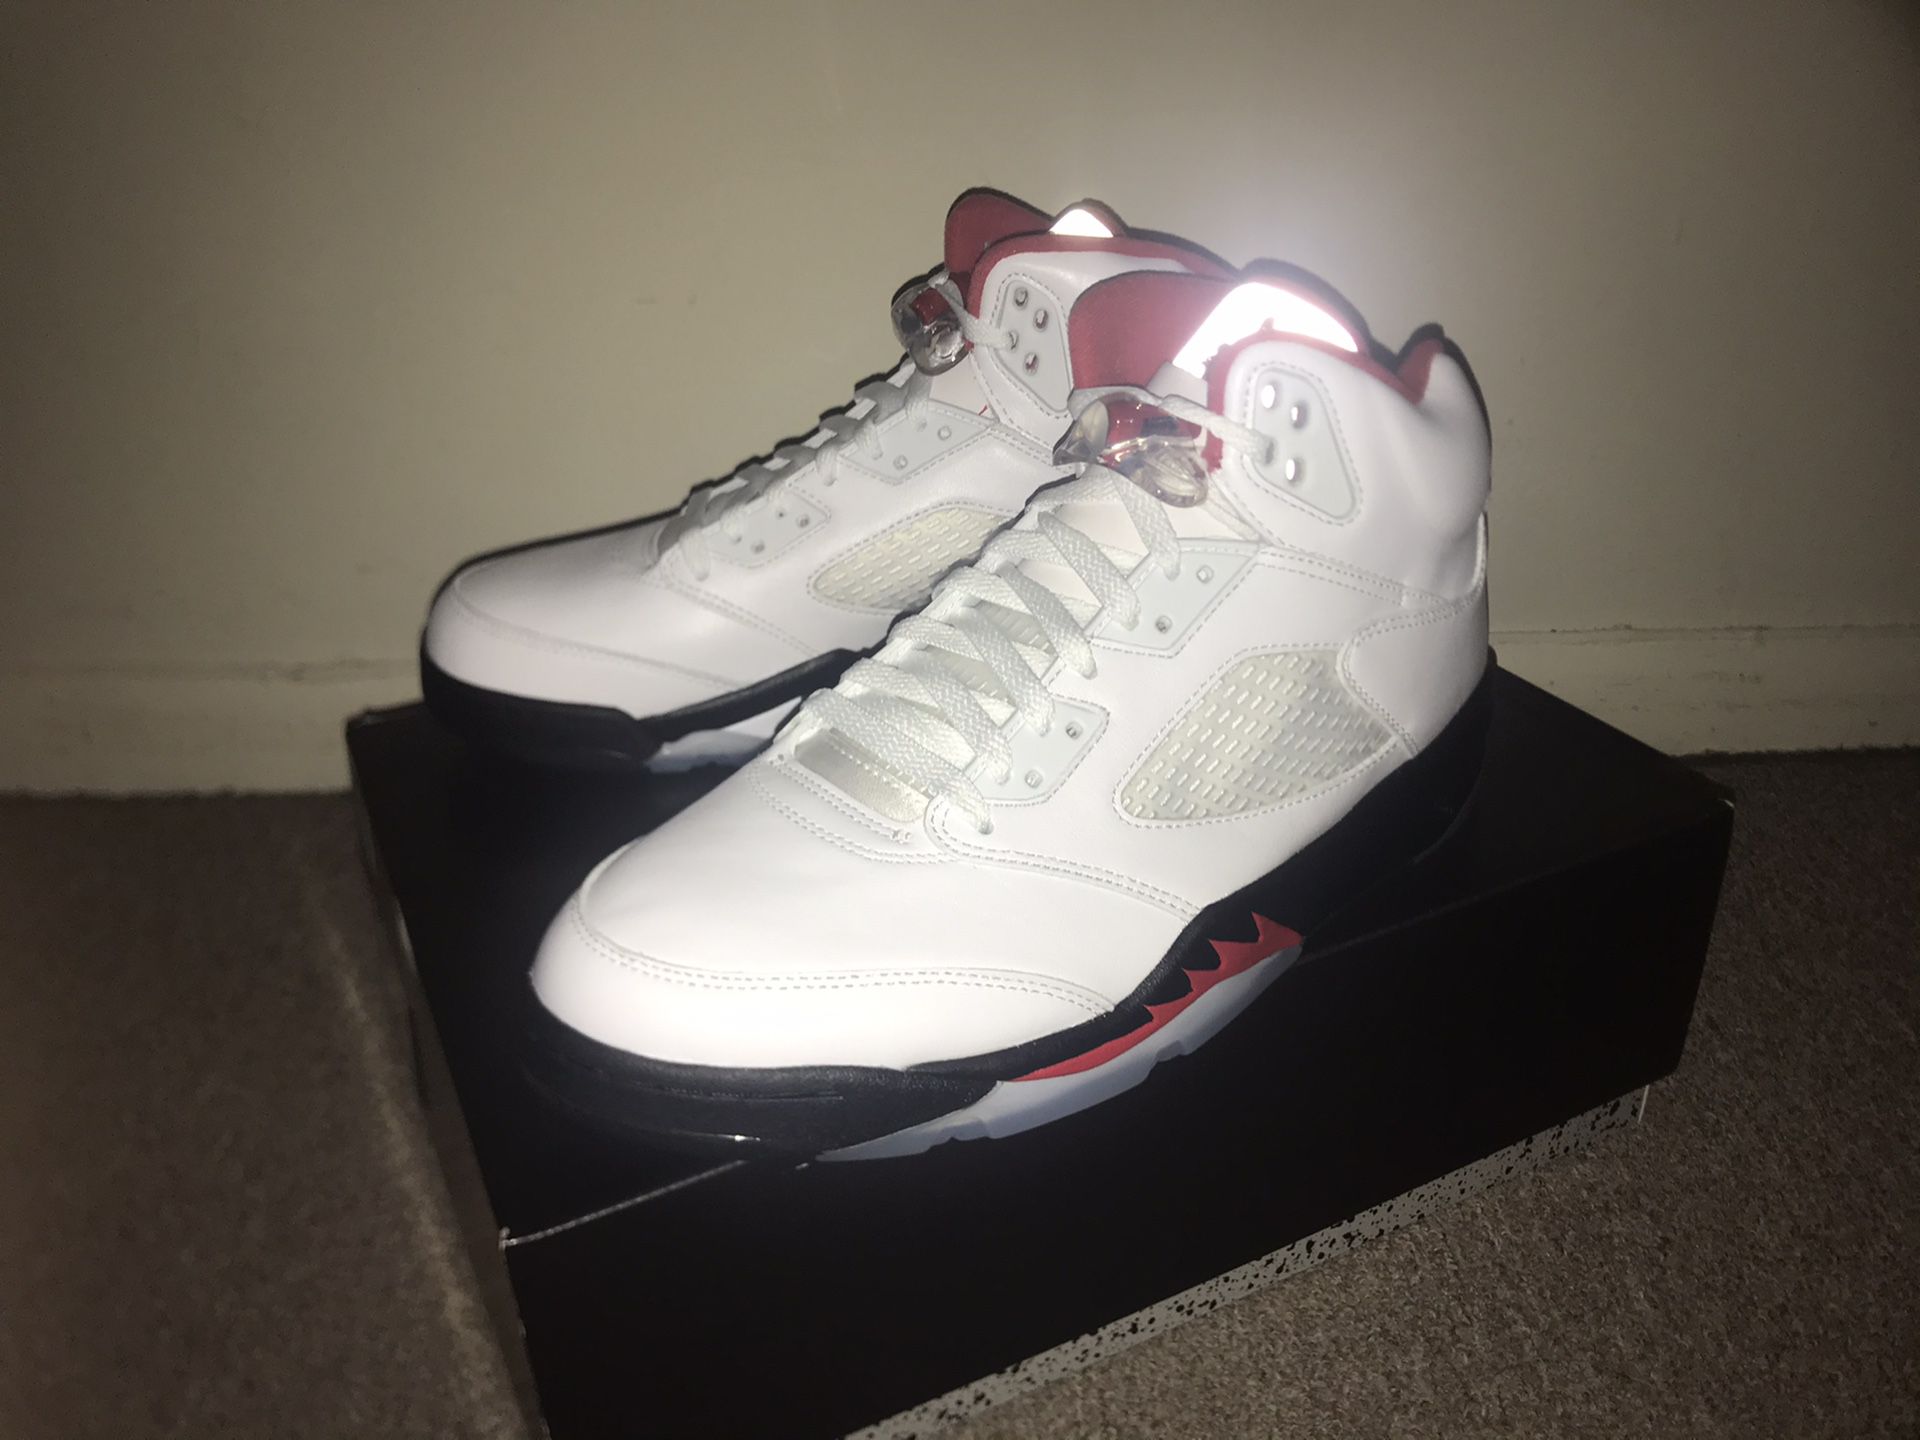 NEW JORDAN 5 FIRE RED SILVER TONGUE (2020) SIZE 11